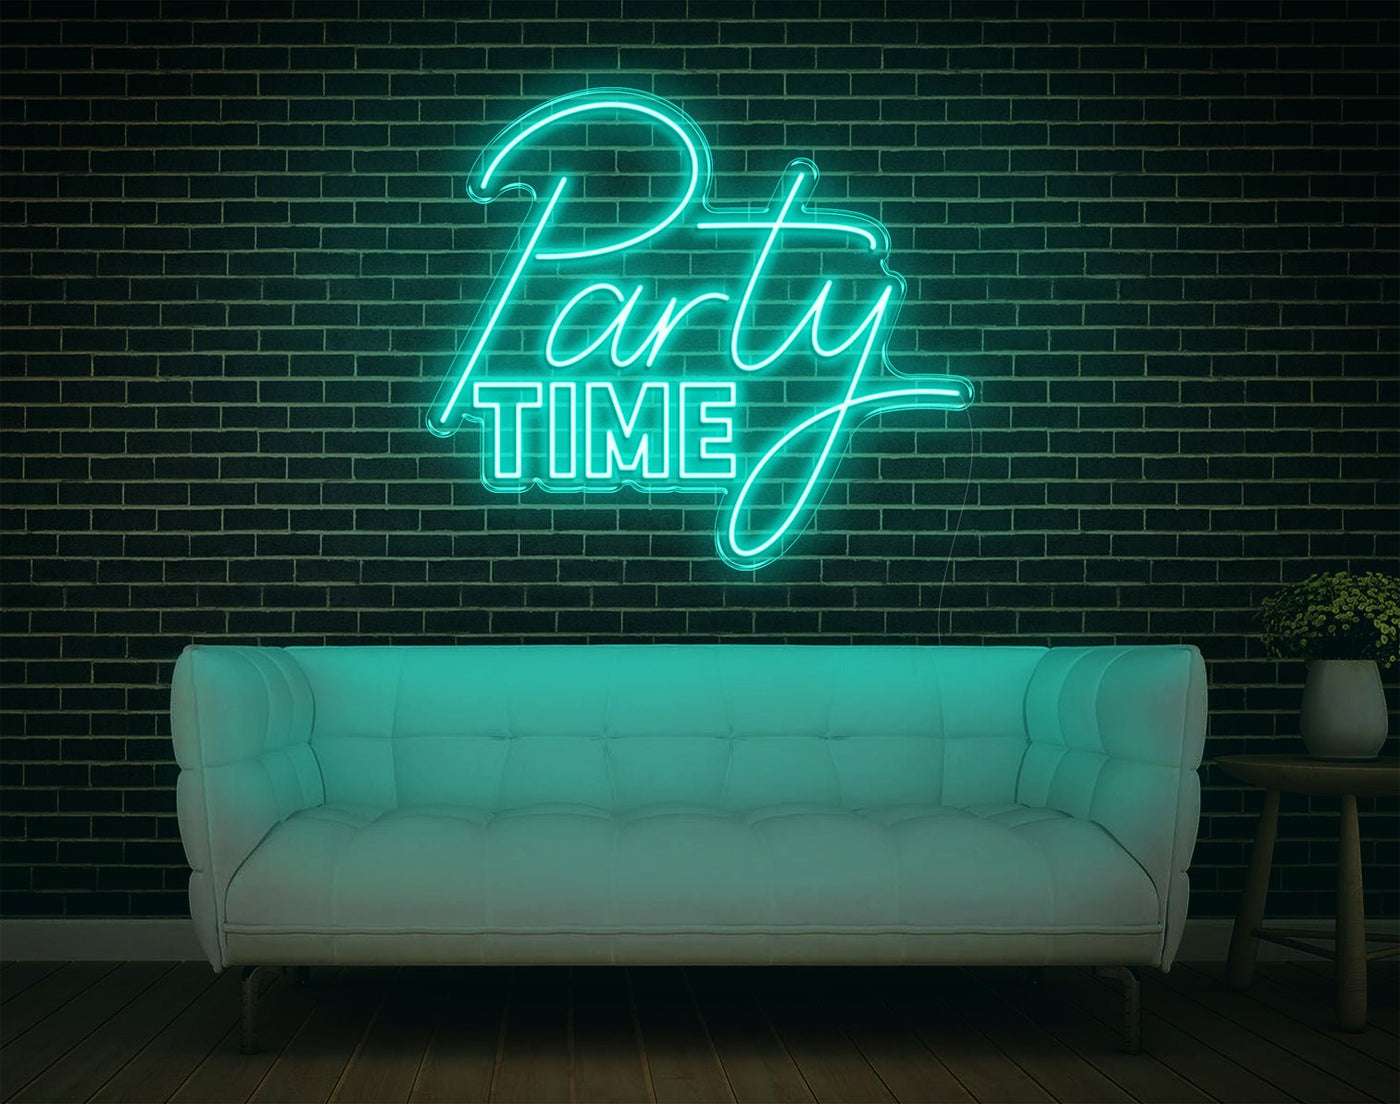 Party Time LED Neon Sign - 27inch x 31inchTurquoise